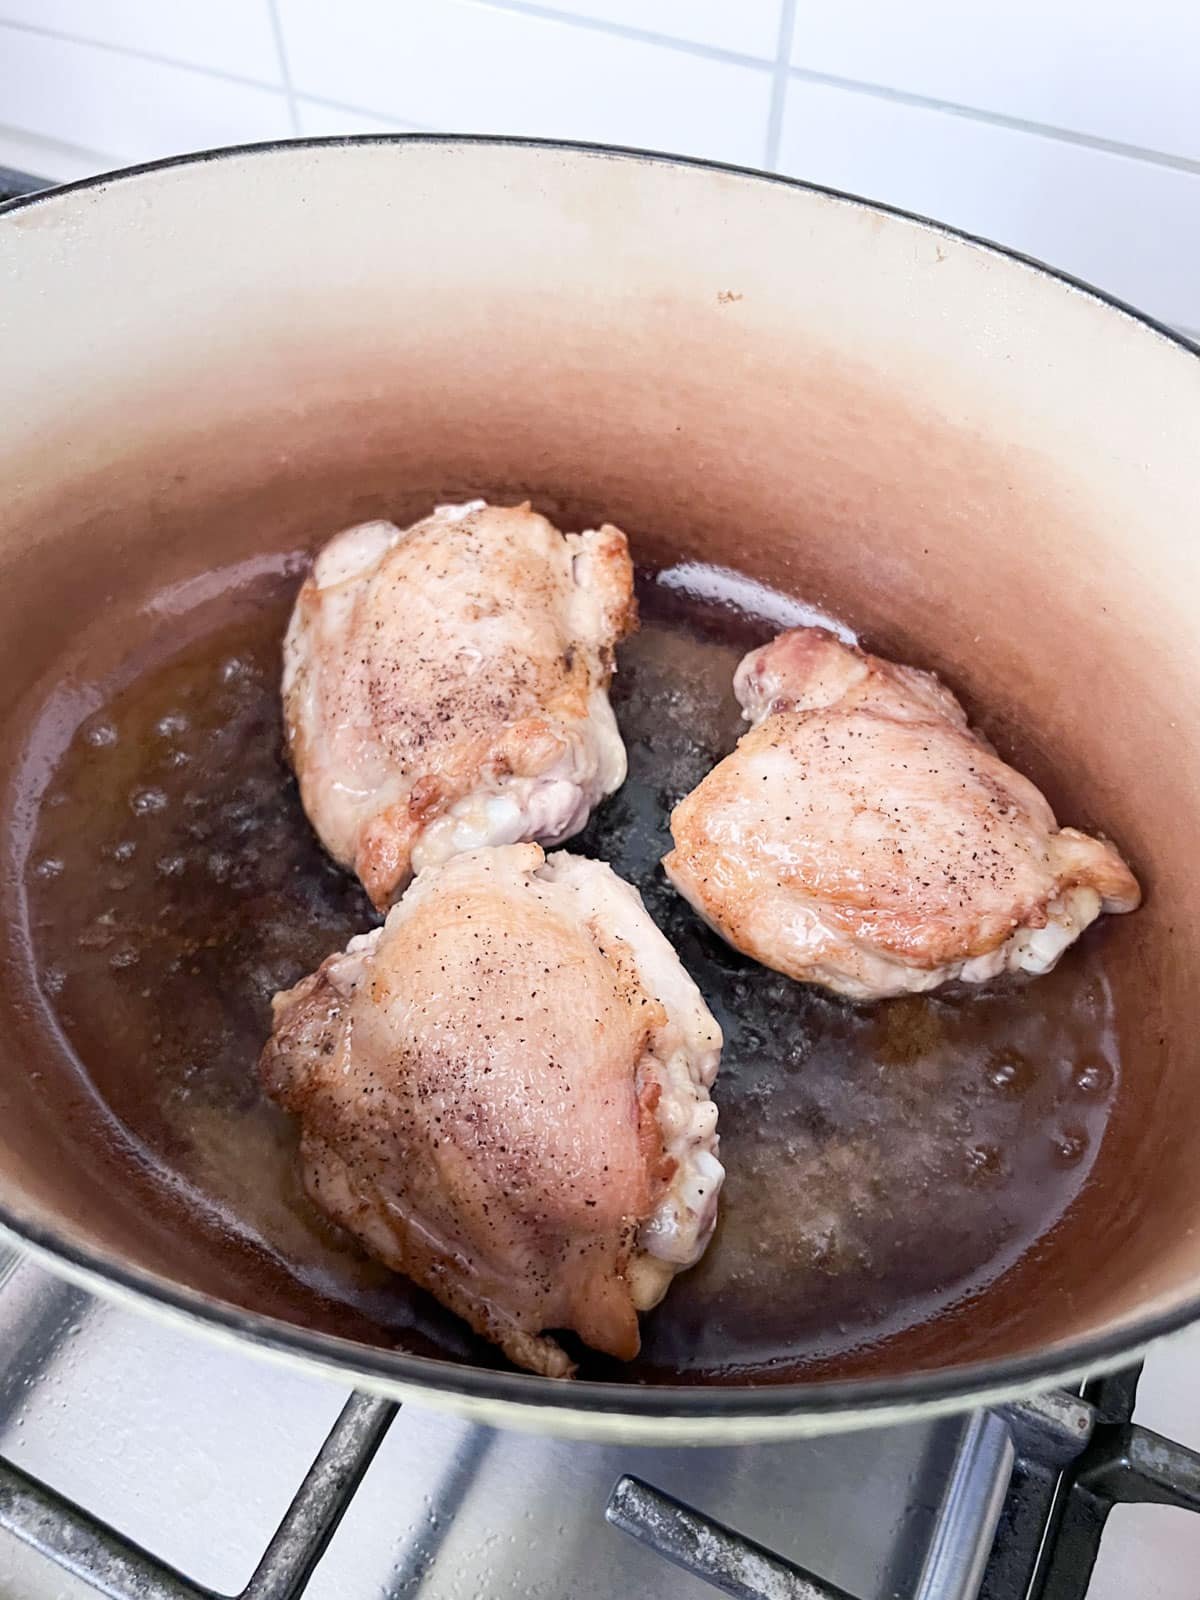 Chicken pieces browning in oil in the dutch oven.